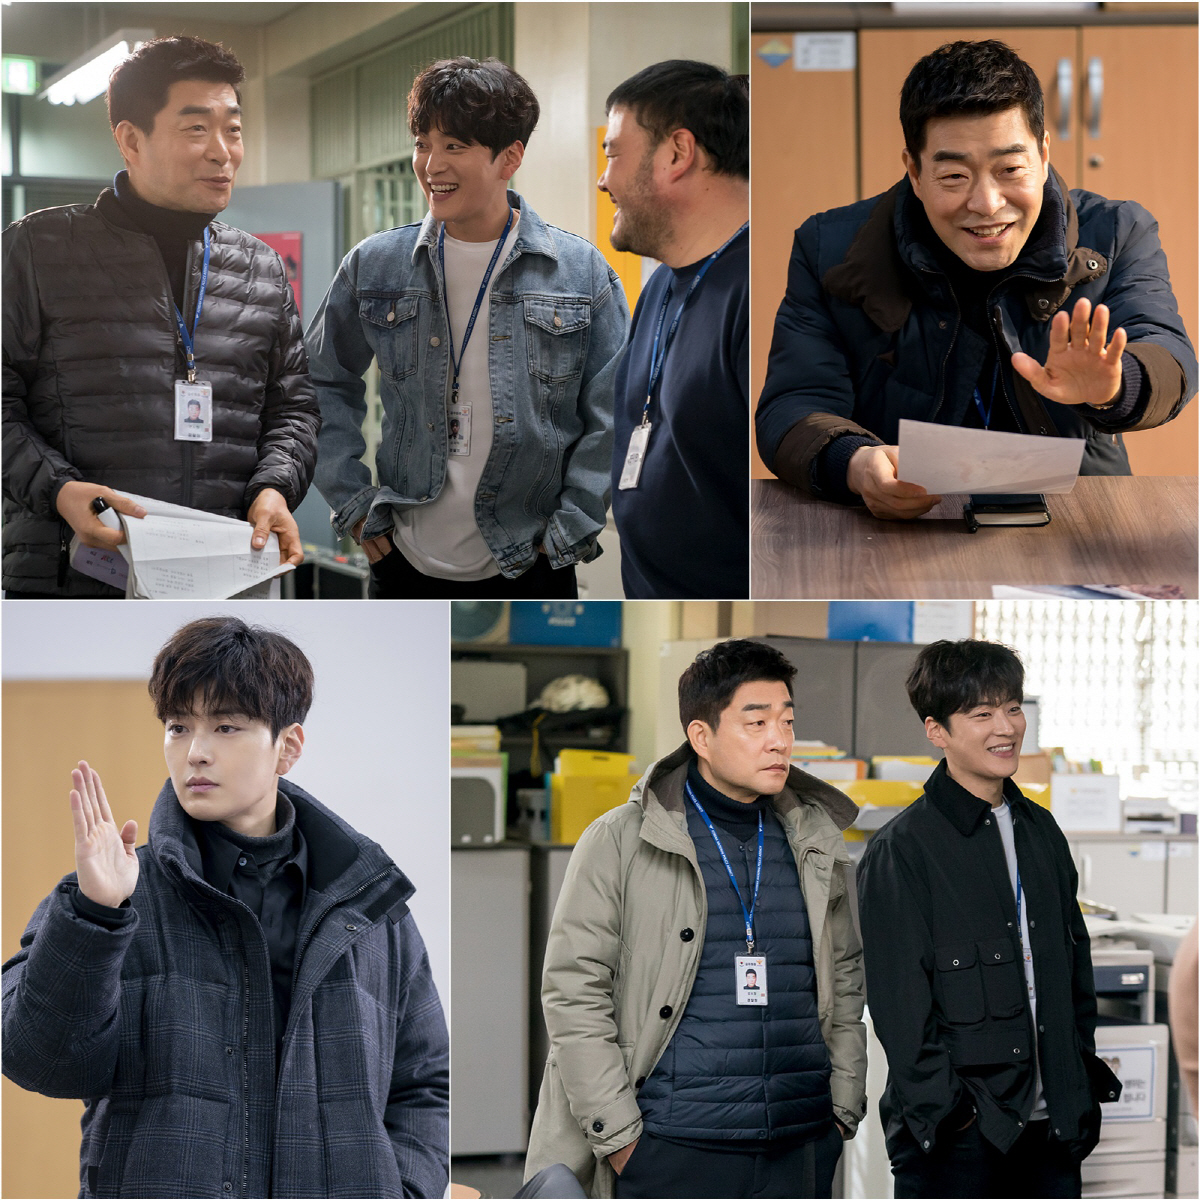 The Good DetectiveDetective unveiled a behind-the-scenes still cut that was saved by praying for a cheerful counterattack between Son Hyun-joo and Jang Seung-jo.The reason for the praise of well-made genre shows that there was a sticky teamwork of actors.In addition, the two Detectives, who are continuing their journey as a fantasy partner in the combination of the hallucinations, have directly conveyed the observation point that they explore to the end and added expectations.JTBC Mon-Tue drama The Good DetectiveDetective (playplayplay by Choi Jin-won, director Cho Nam-guk, production by Bluthumb Kahaani, JTBC Studio) is loved by viewers every time with new reversal, exciting development, and heart-warming stories.So, we have maintained the highest audience rating every time and keep the position of Mon-Tue drama number one.In particular, as the two powerful teams, including Son Hyo-jo and Jang Seo-hyuk, continued their exciting performances in the second act, which began with the fact that Jinbeom was no longer asked for legal responsibility, unlike this season (Cho Jae-yoon), who was sacrificed and used an unfair An Innocent Man, the expectation of viewers is increasing day by day.The Good DetectiveDetective has released a generous behind-the-scenes cut of Son Hyo-jo and Jang Seung-jo, which show fantastic breathing, and released the observation points directly conveyed by the two actors.First, Son Hyun-joo predicted, Due to the sadness and anger that did not save this season, Kang Do Chang, Oh Ji-hyuk and the strong 2 team will join together to follow until the end to reveal the crime of Oh Jong-tae.Jang Seung-jo also said, Please look forward to the two Detectives who try to dig through the event of the end of this season without missing the event and the reality of the event revealed in it.As they predicted, they focused their attention on the audience by counterattacking those who concealed the truth even in the worst crisis in the 10th broadcast on the last 4 days.I wonder what truth is waiting for the end of the The Good DetectiveDetective robbery window and Oh Ji-hyeoks rush to Detective chases the criminal to the end.In the behind-the-scenes cut, you can get a glimpse of the source of fantasy breathing. In the last broadcast, I have only my brother to believe.My brother tends to underestimate his ability. I can do it if I want to do it. Ojihyuk, who once again showed unidentified confidence to Kang Chang Chang.But his faith was that Kang Do-chang knew exactly how to move to strip Oh Ji-hyeoks An Innocent Man.There was a sticky feeling between the two people during the accident.And the reason why viewers can feel the feeling is because of the luxury act that melts the sticky breathing of Son Hyun-joo and Jang Seung-jo.The production crew said, Even though the two people always keep the scene with a smile, when the camera starts to turn, they immerse themselves in the character and infuse the soul of Acting into all the screens.The synergy of the act, which was seriously analyzed and worried about the script, raised the perfection of the drama. The Good DetectiveDetective is left only six times in the future.I want you to be able to reveal the concealed truth that Kang Do Chang and Oh Ji Hyuk wanted so much, and comfort this seasons unfair heart, and to be together until the end of the two exciting investigative drama The Good Detective, which is different from each other.The Good DetectiveDetective JTBC broadcasts every Monday and Tuesday at 9:30 pm.Photo courtesy = Bluthumb Kahaani, JTBC Studio